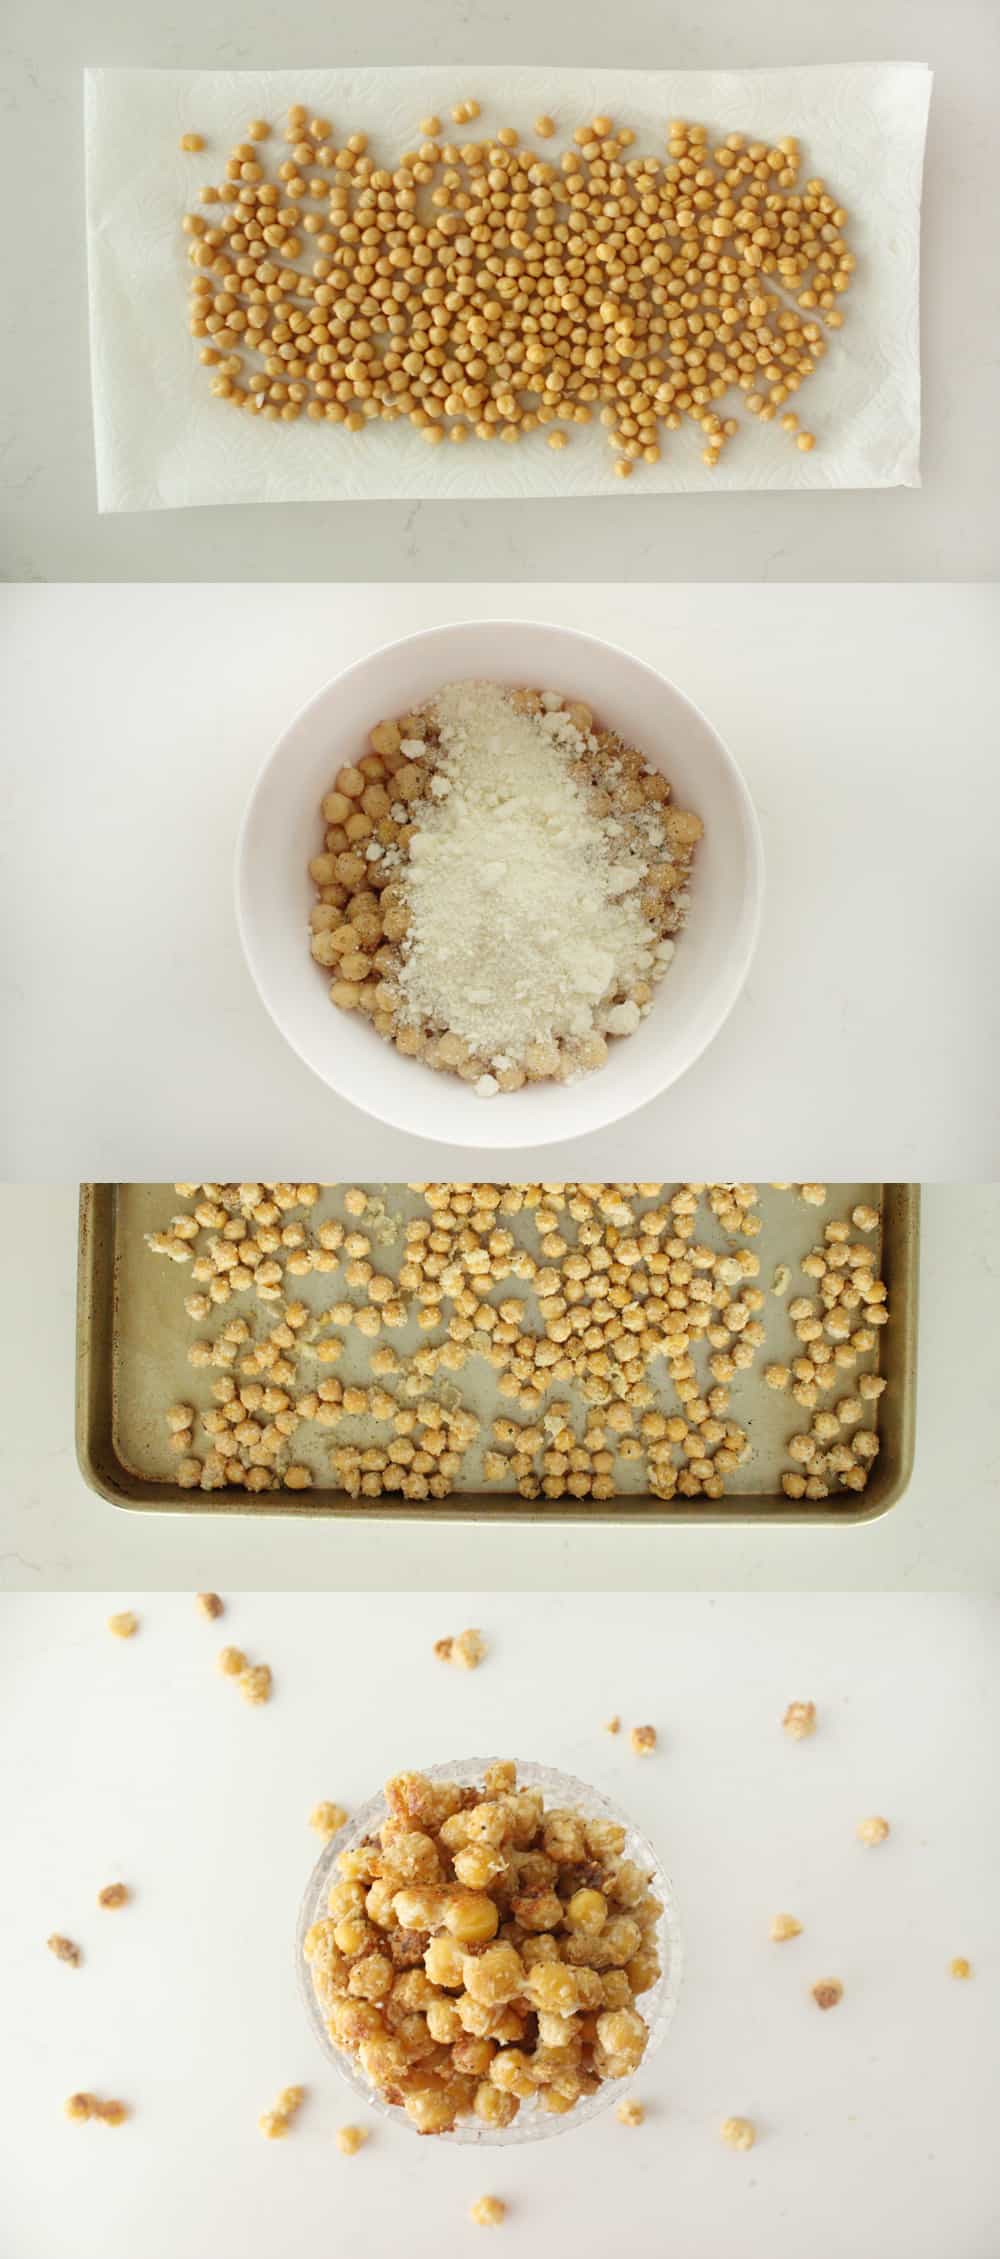 If you need a healthy and delicious snack, these roasted chickpeas are for you! So yummy, even my picky eaters love them! 